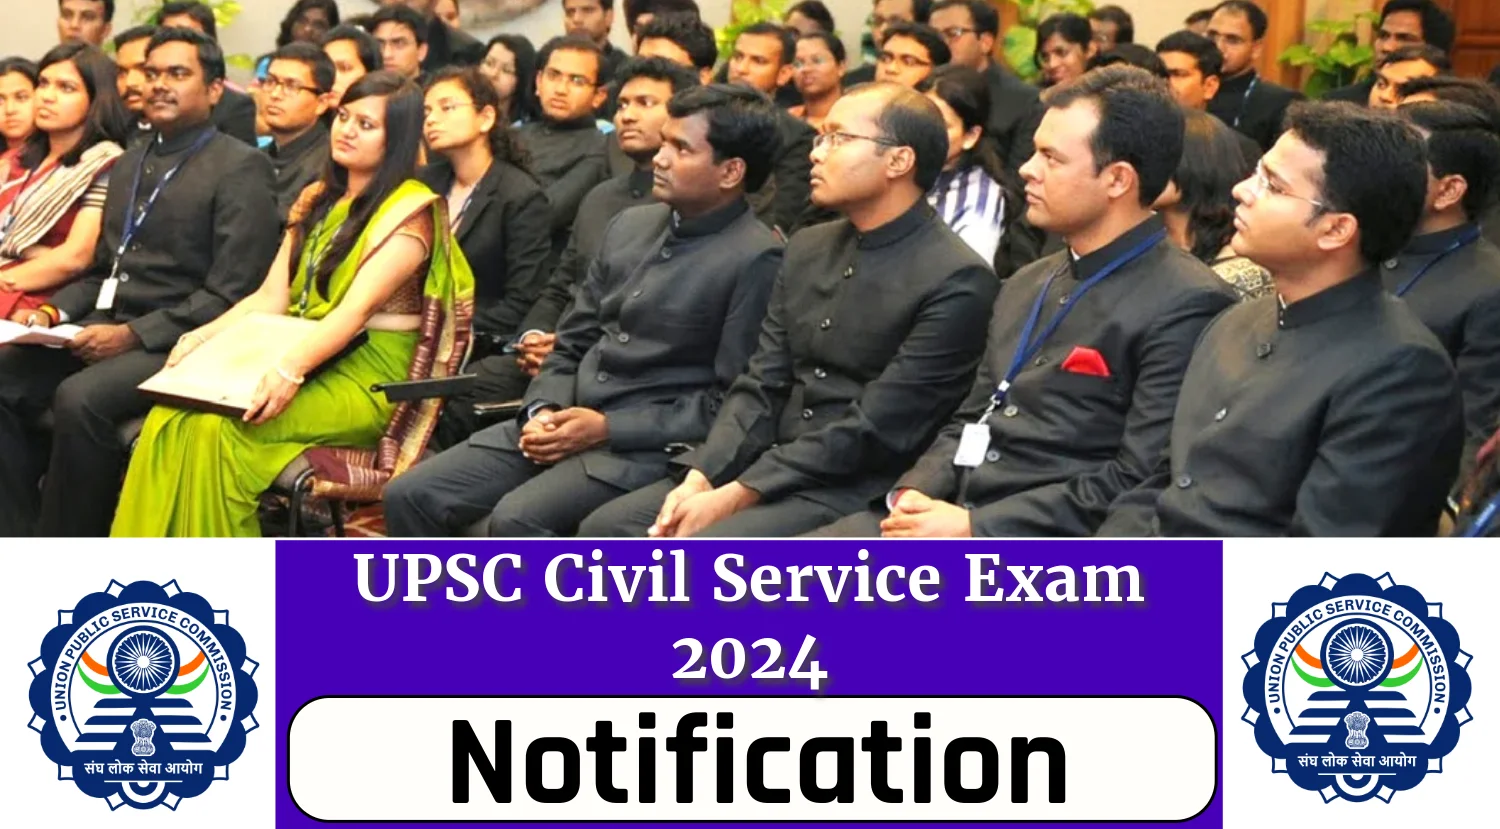 UPSC Civil Service Exam 2024 Notification Out